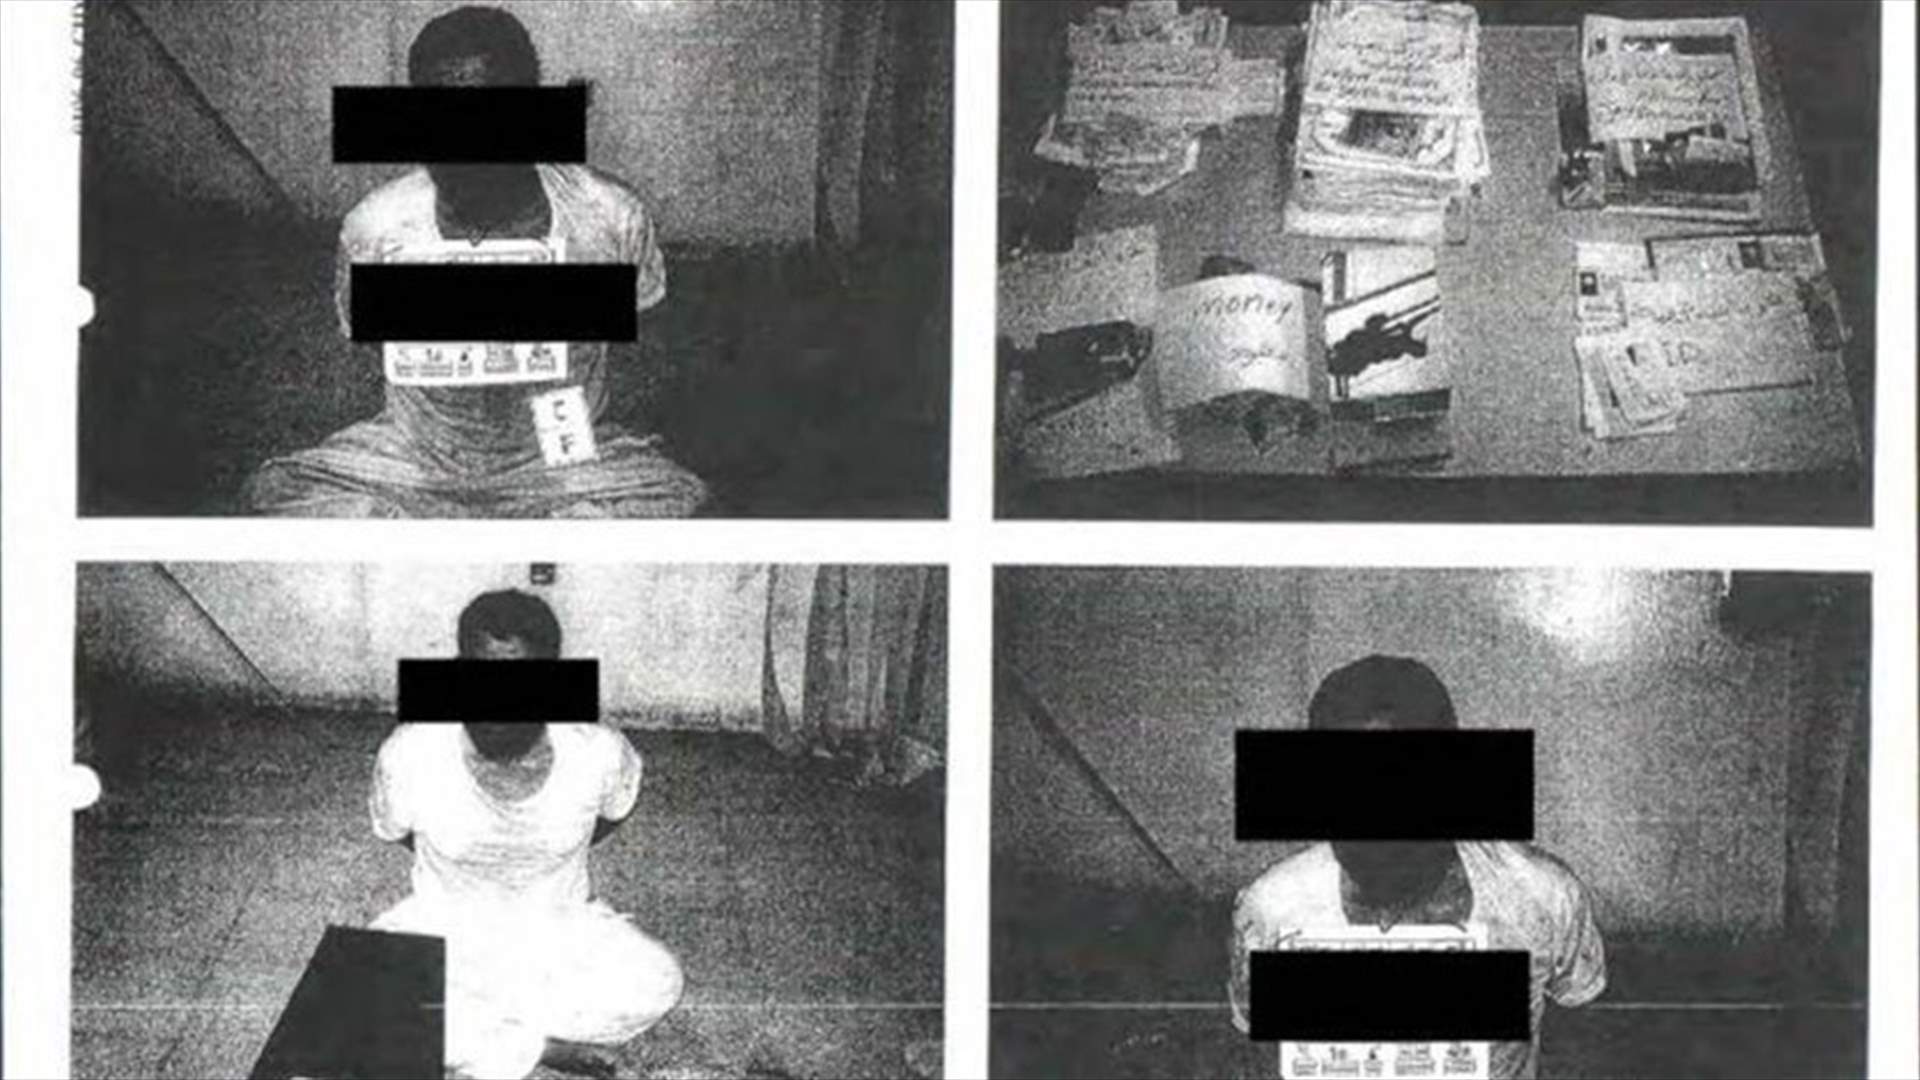 Pentagon releases photos of alleged detainee abuse